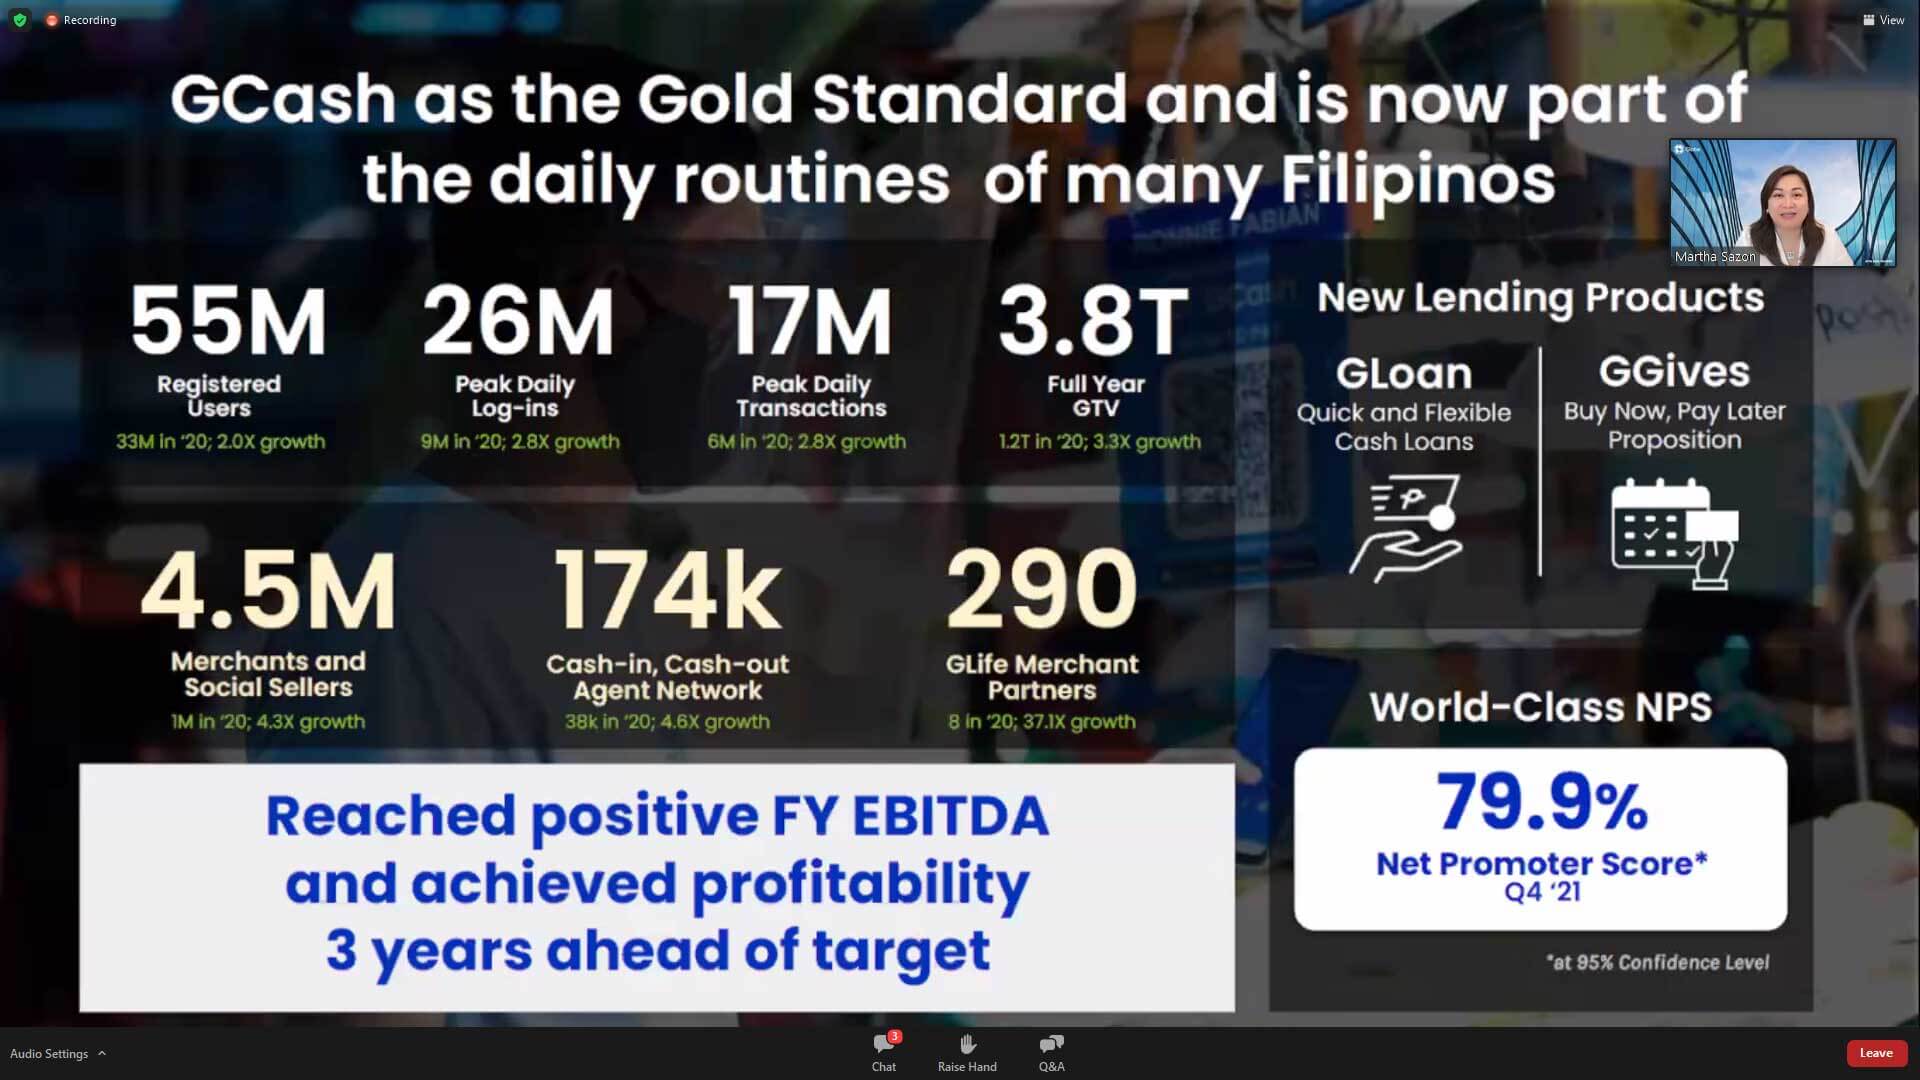 BANNER YEAR. Martha Sazon, President and CEO of Mynt, the company behind GCash, talks about the performance of the financial technology platform in an online briefing.